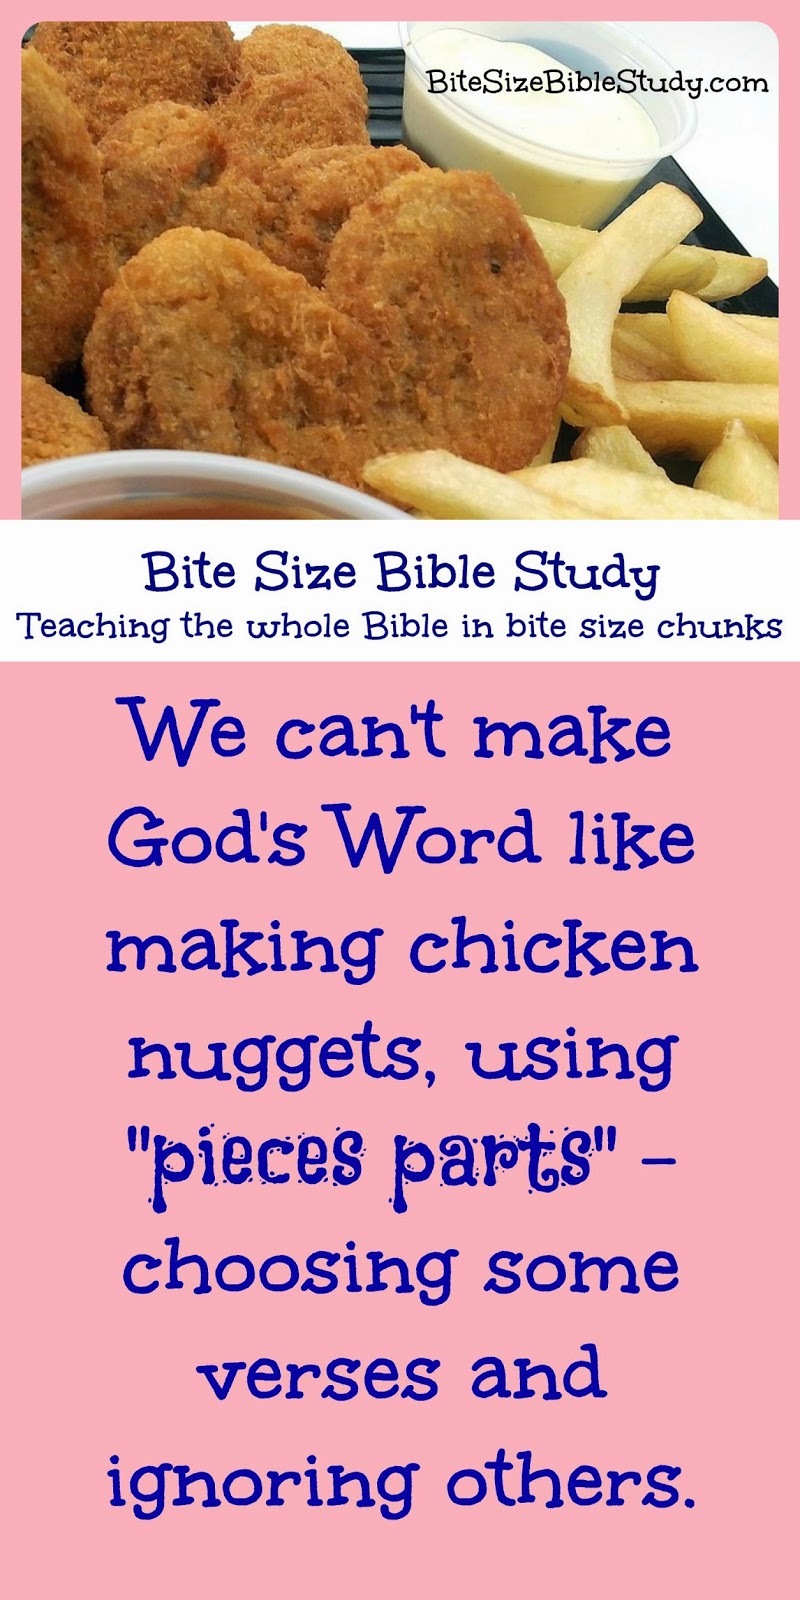 Using only parts of God's Word, picking apart the Bible, Wendy's pieces parts McDonald's McNuggets